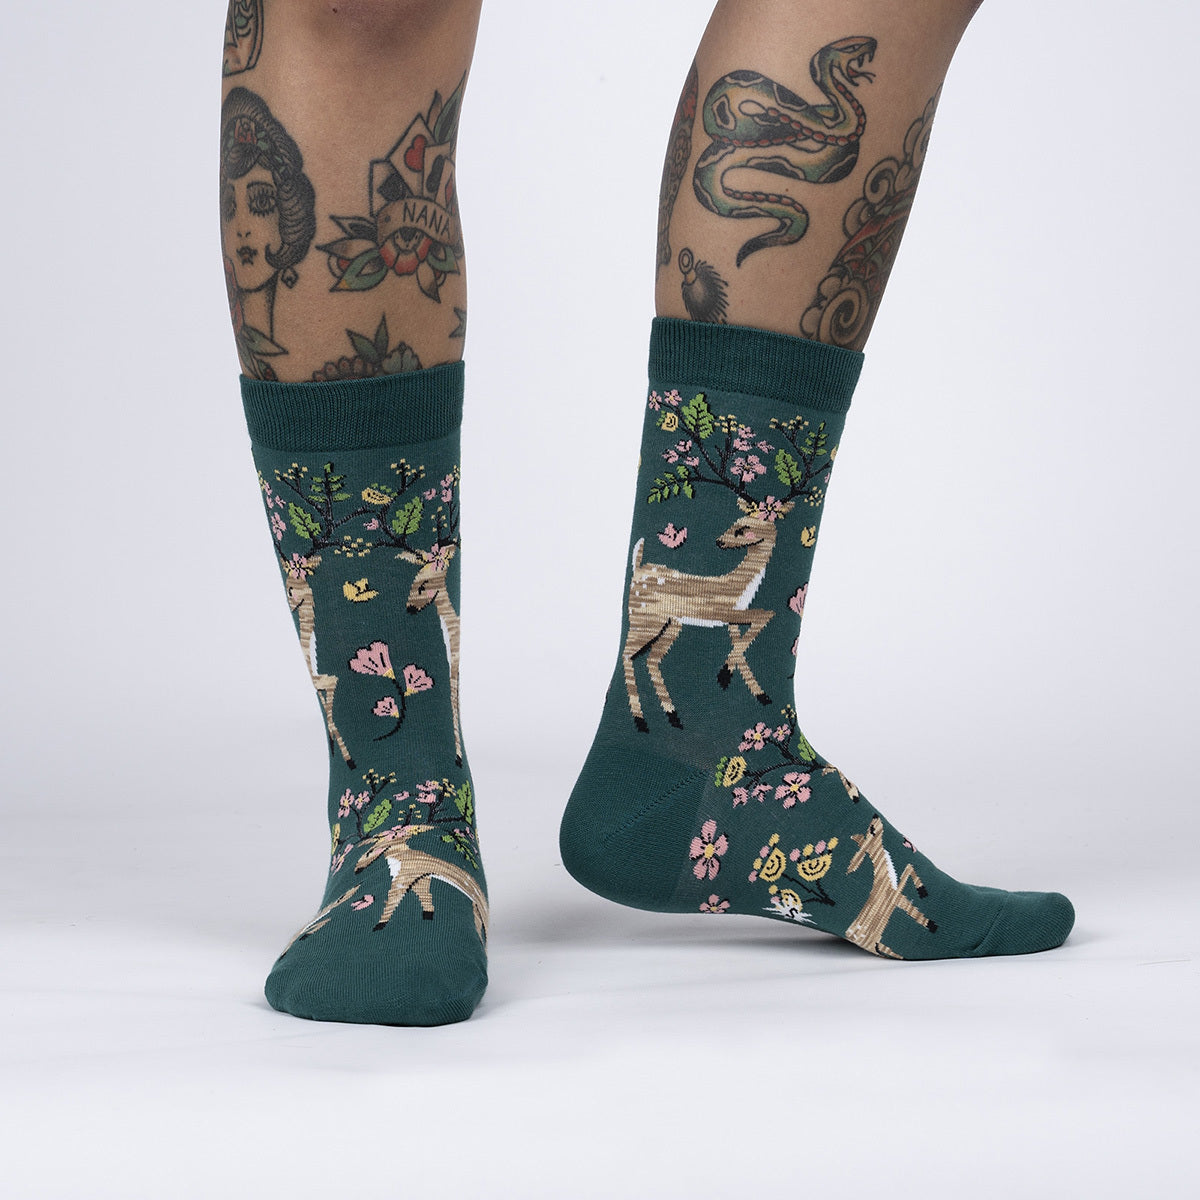 Sock It To Me Spring Awakening women&#39;s crew sock. Featuring green sock with deer and spring flowers. Socks shown on model.